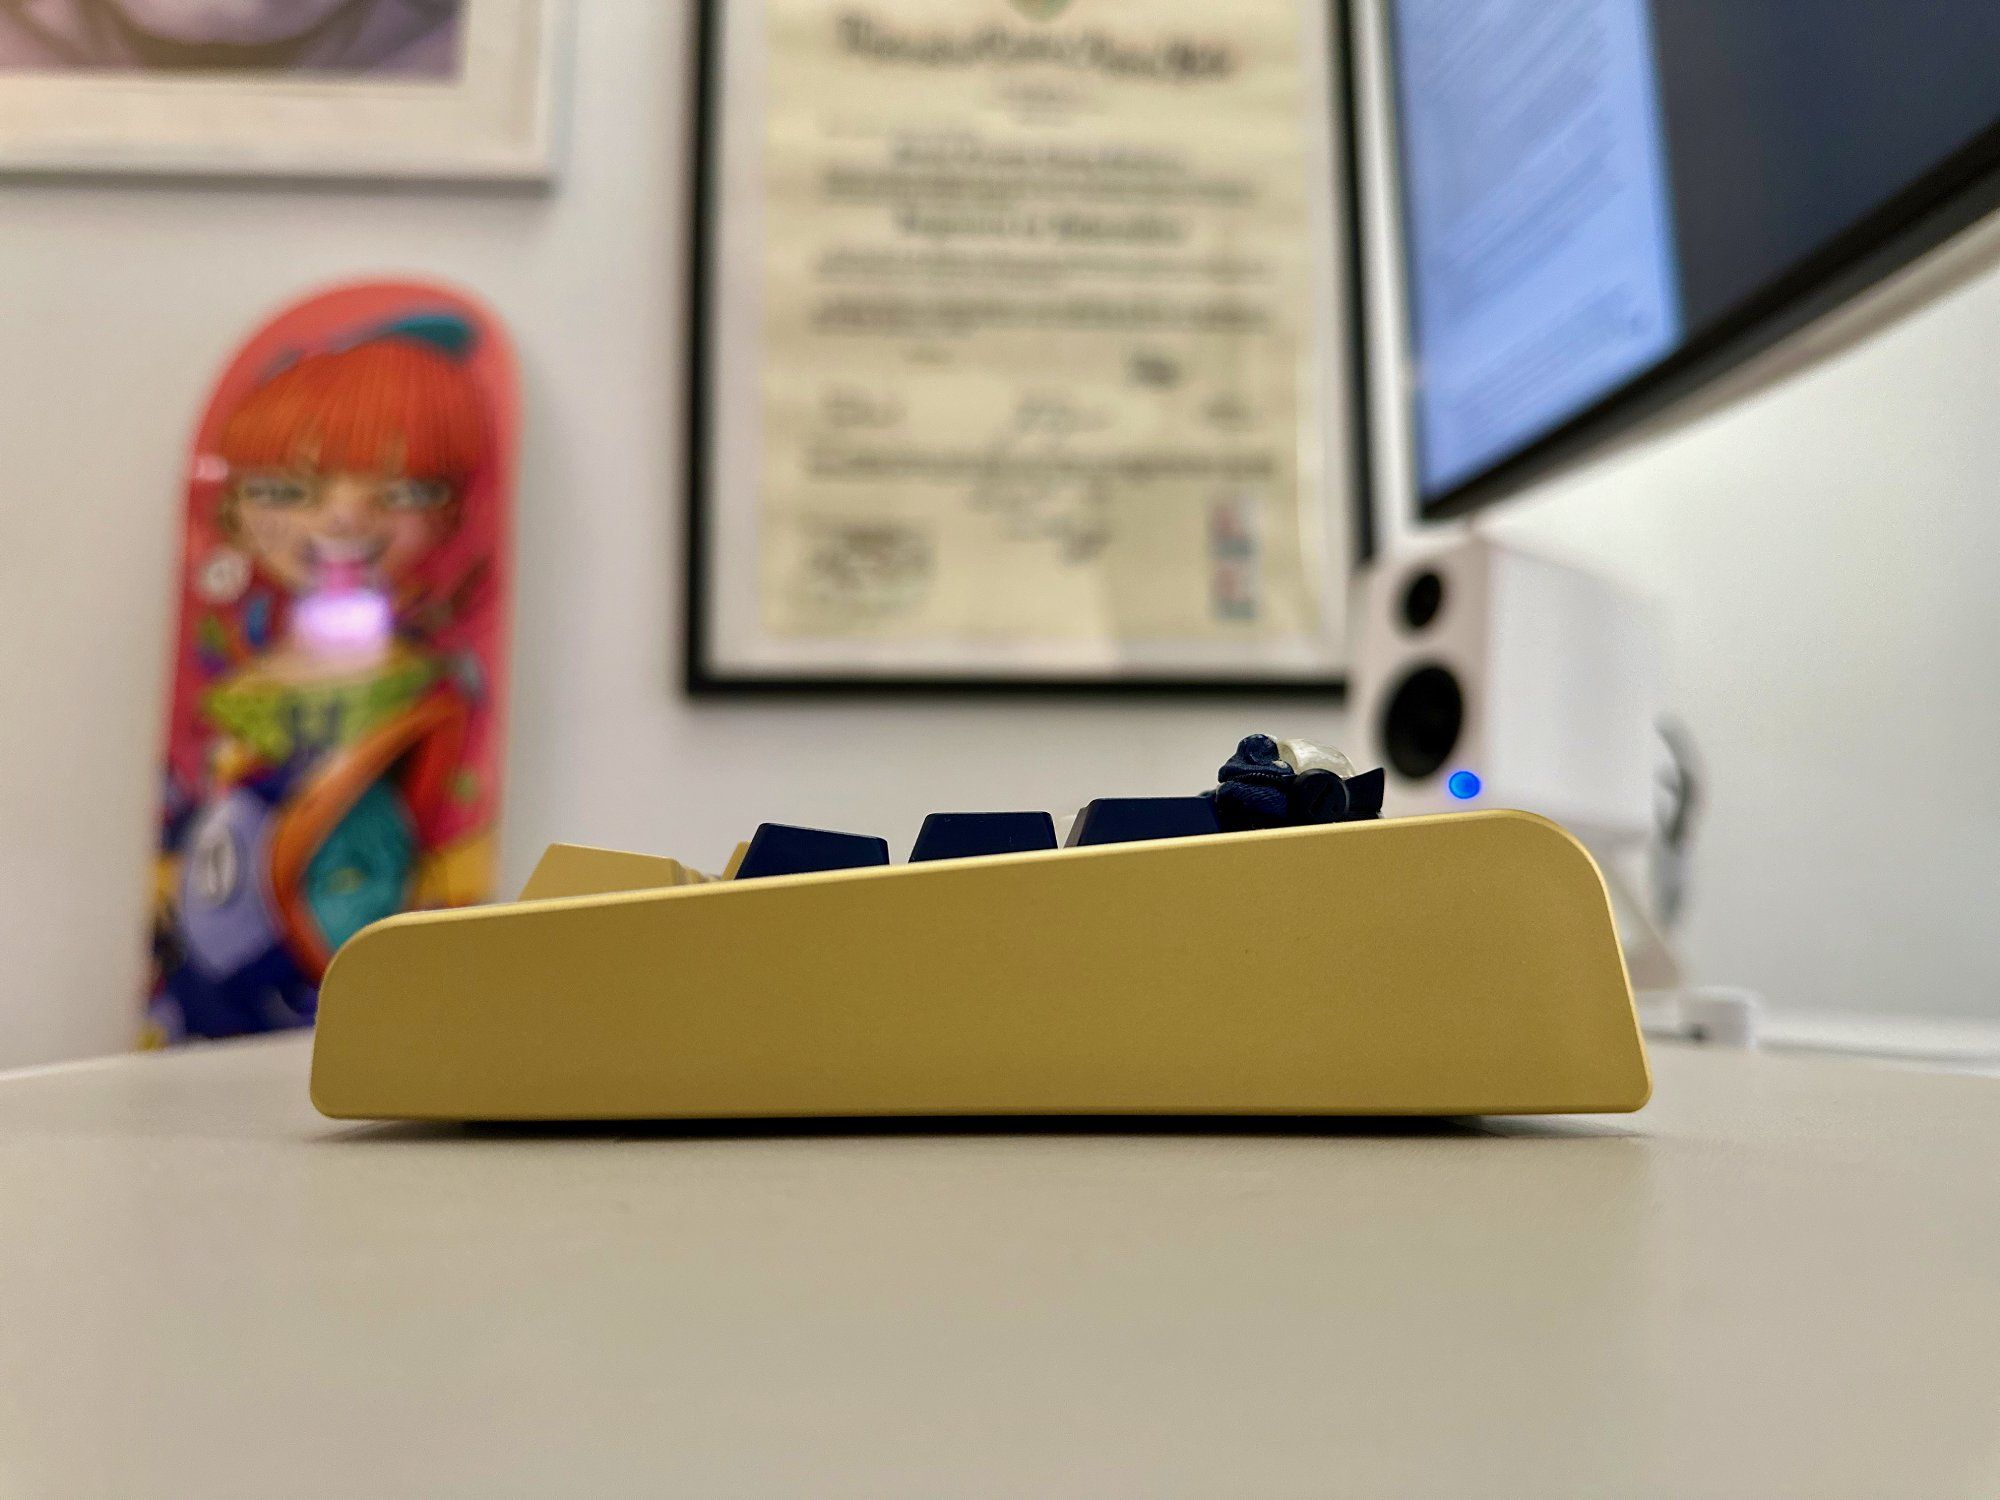 A side view of a Gentoo mechanical keyboard